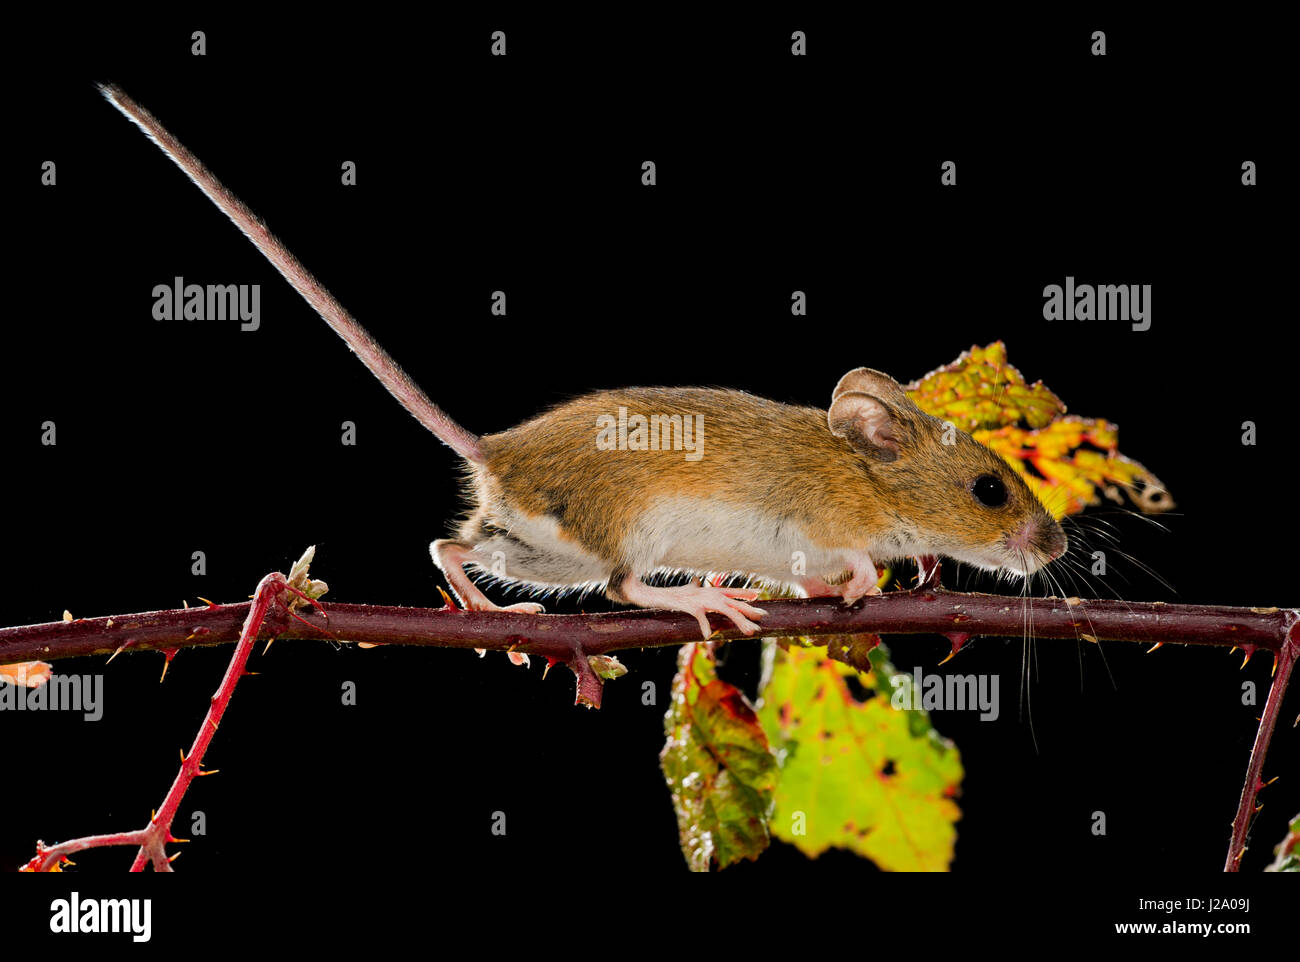 The wood mouse (Apodemus sylvaticus) is a common murid rodent from Europe and northwestern Africa. It is closely related to the yellow-necked mouse (Apodemus flavicollis) but differs in that it has no band of yellow fur around the neck, has slightly smaller ears, and is usually slightly smaller overall: around 90 mm in length. It is found across most of Europe and is a very common and widespread species, is commensal with people and is sometimes considered a pest. Stock Photo